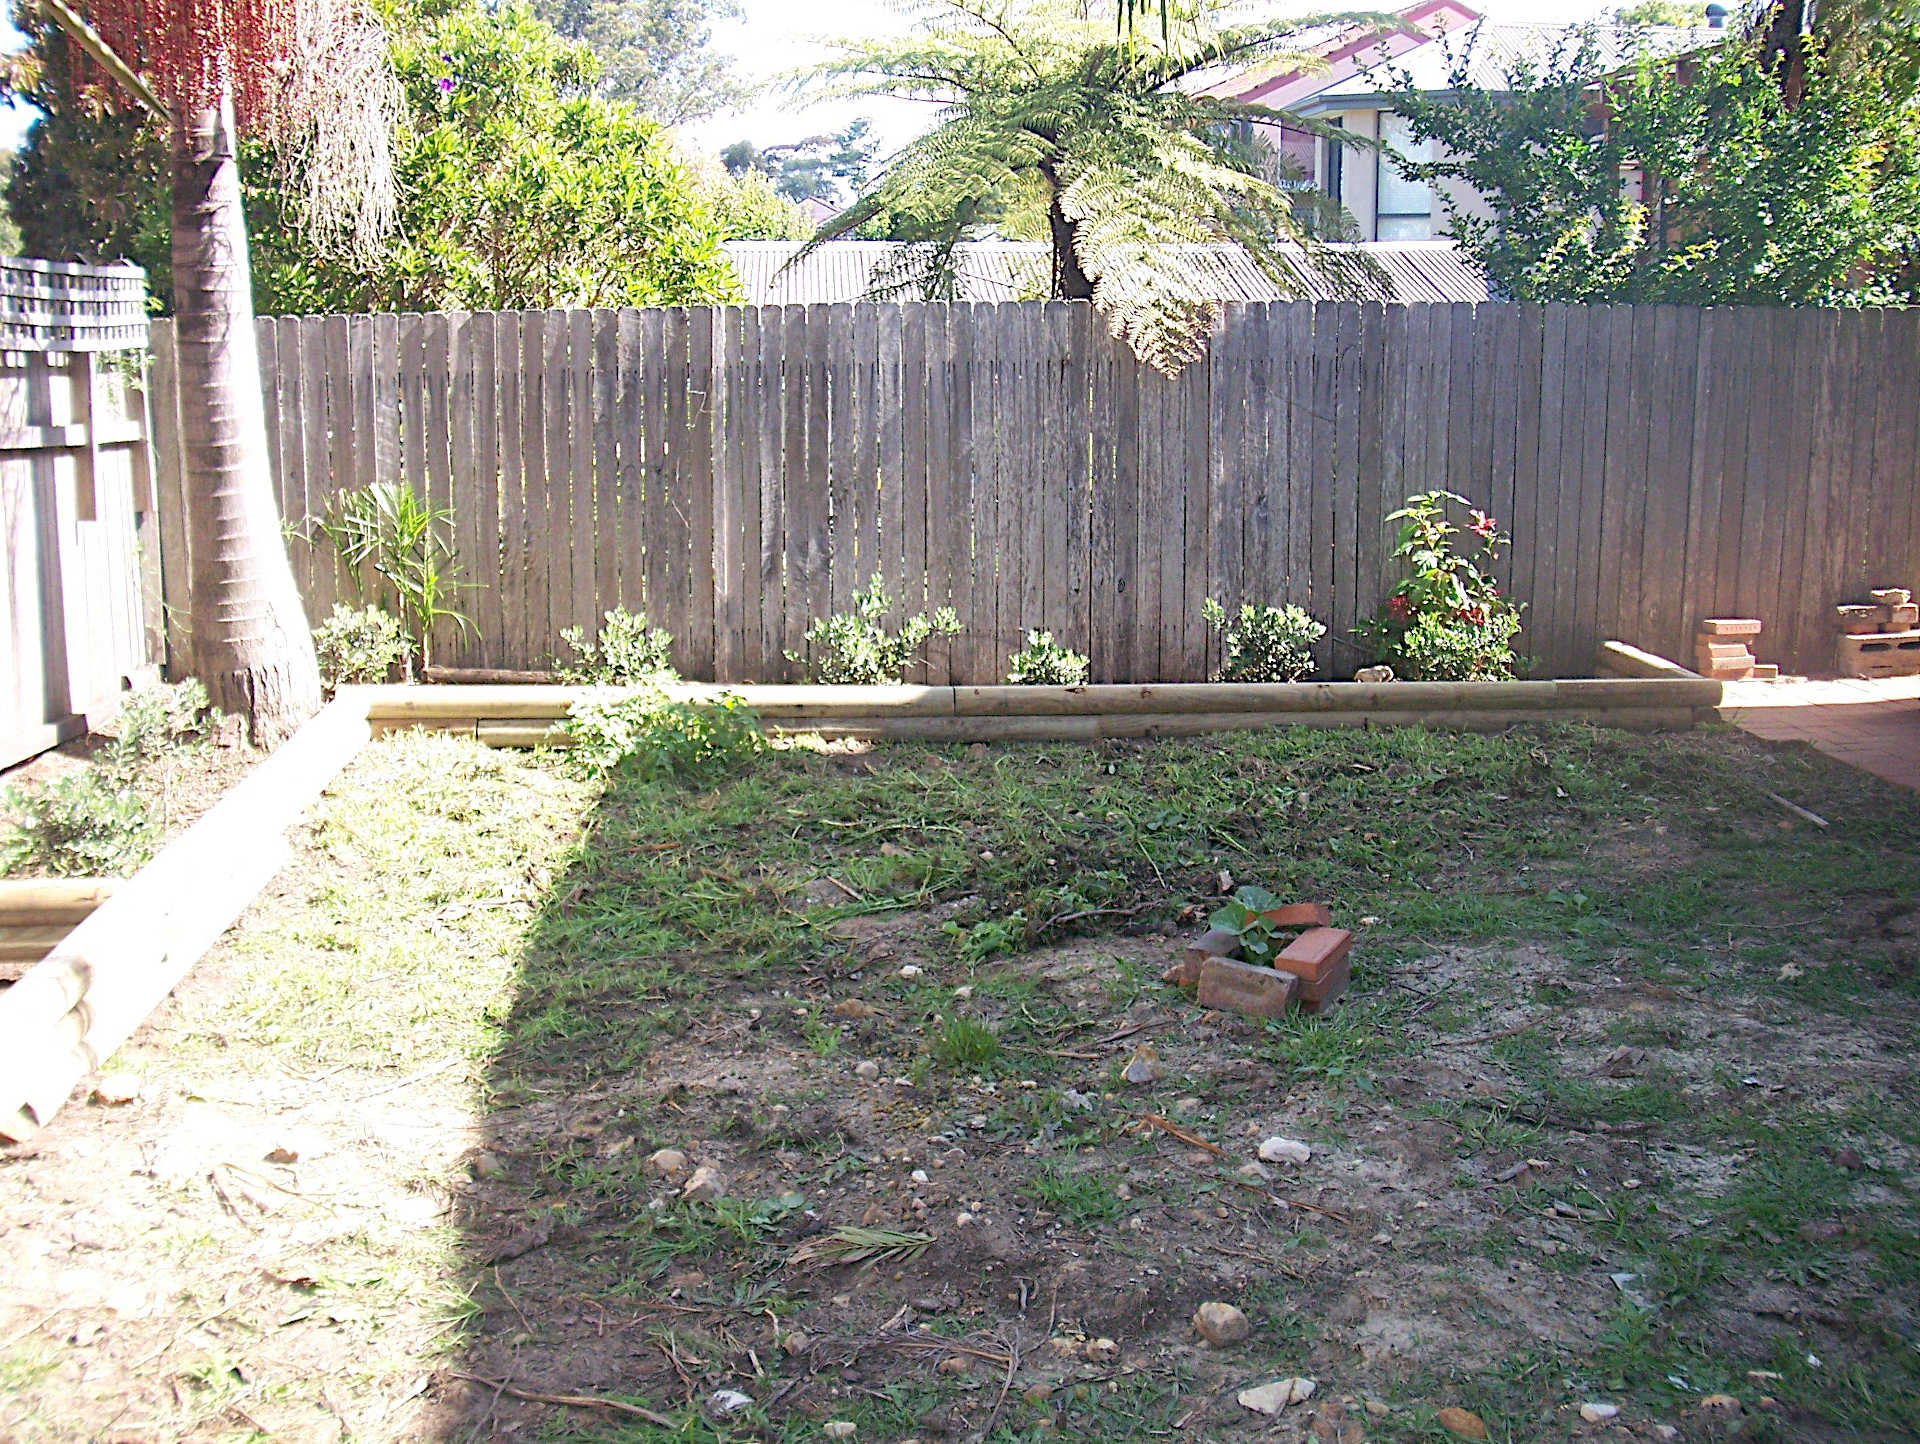 Treated Pine Slabs used as Garden Edging before new turf is laid. Backyard Tidy up, Garden Renovation, Yard Clean up Wollongong New South Wales